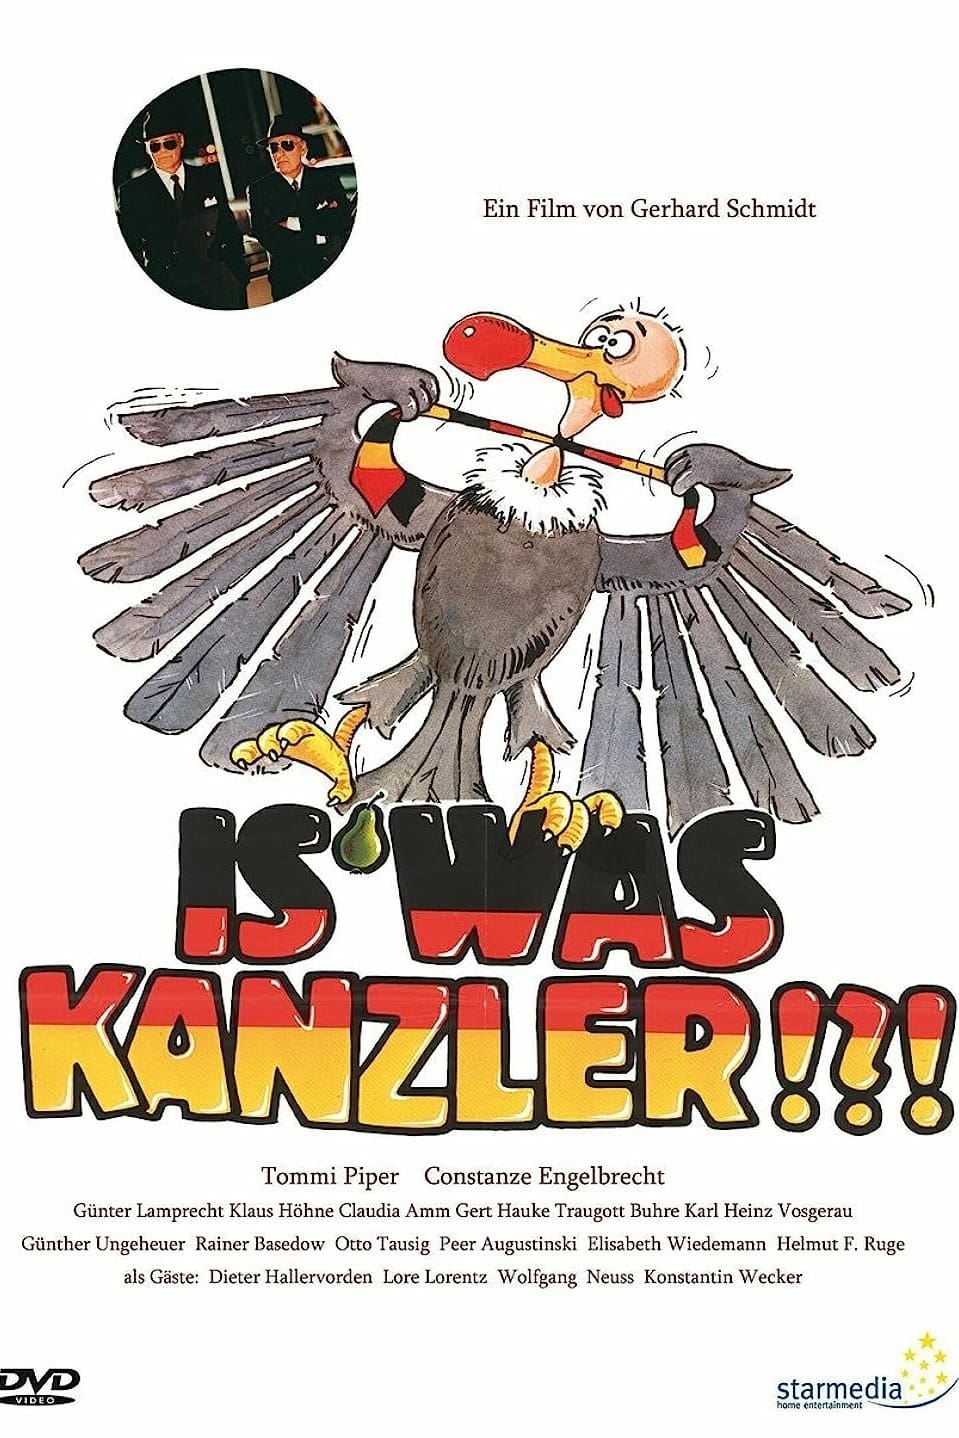 Is was, Kanzler?